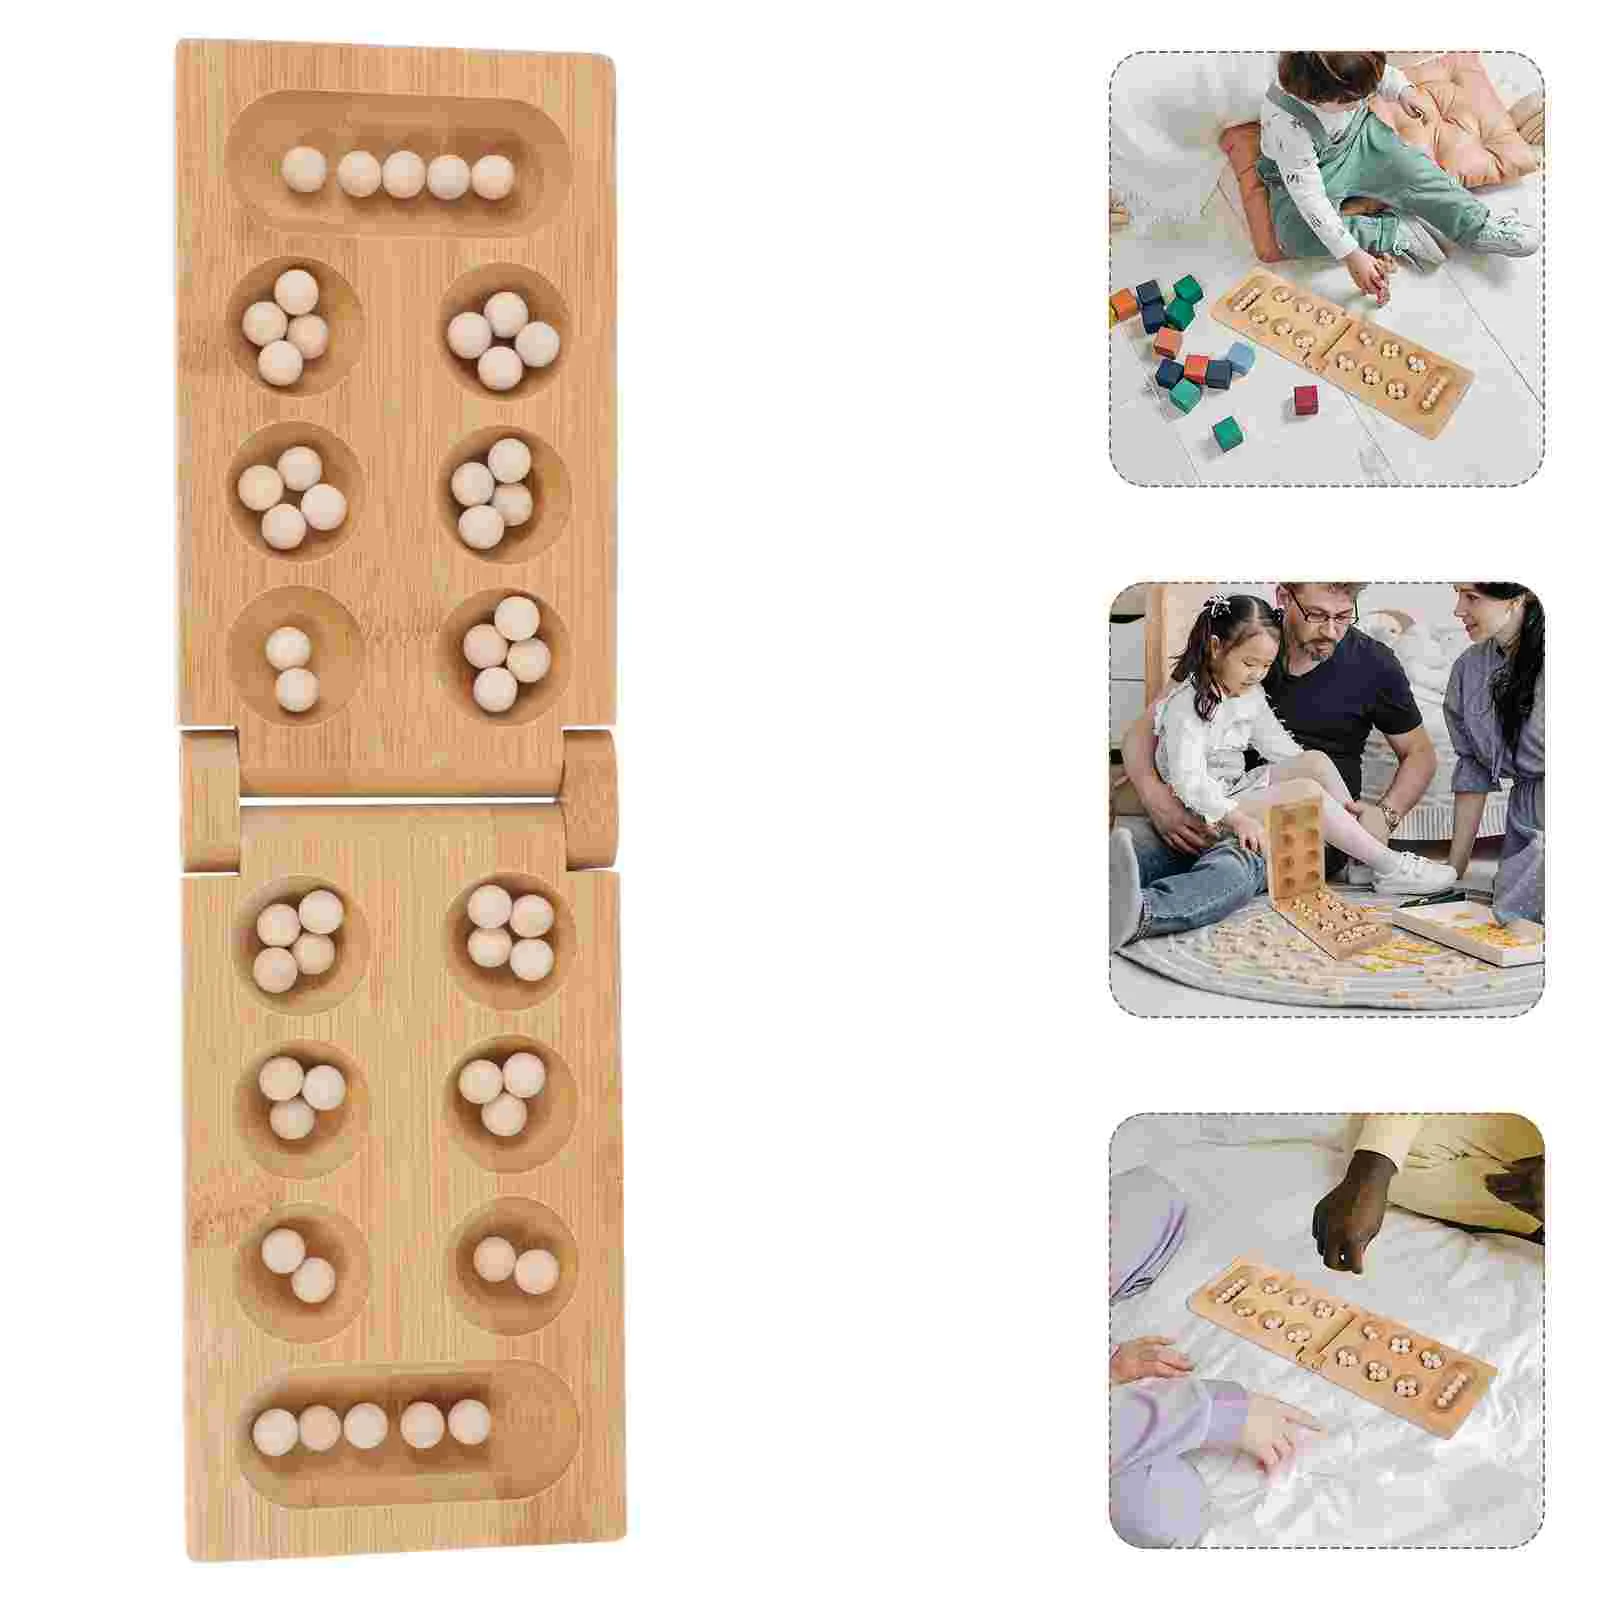 

Mancala Game Board Chess African Wood Set Folding Wooden Kids Family Puzzle Travel Toy Strategic Marble Strategy Bead Games